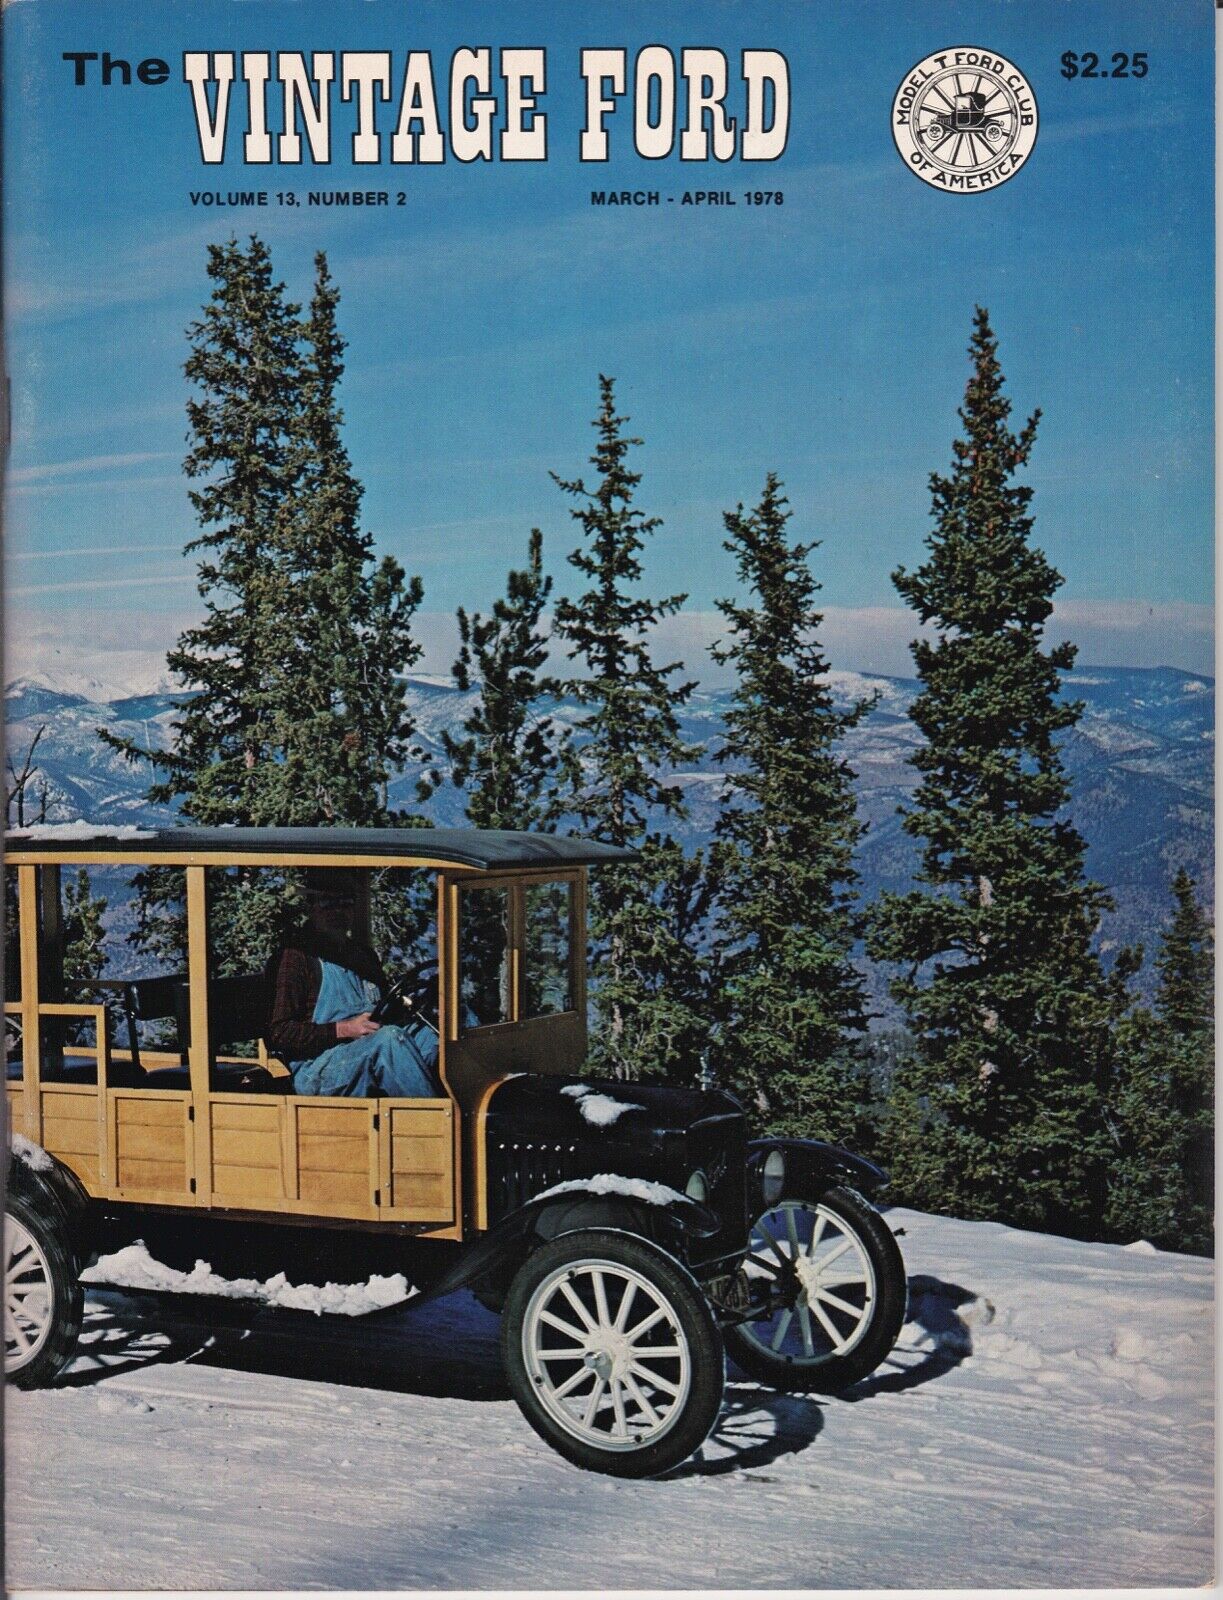 FORD ASSEMBLY, 1913-1914 - The Vintage Ford Magazine - LUXURIOUS TOURING start o